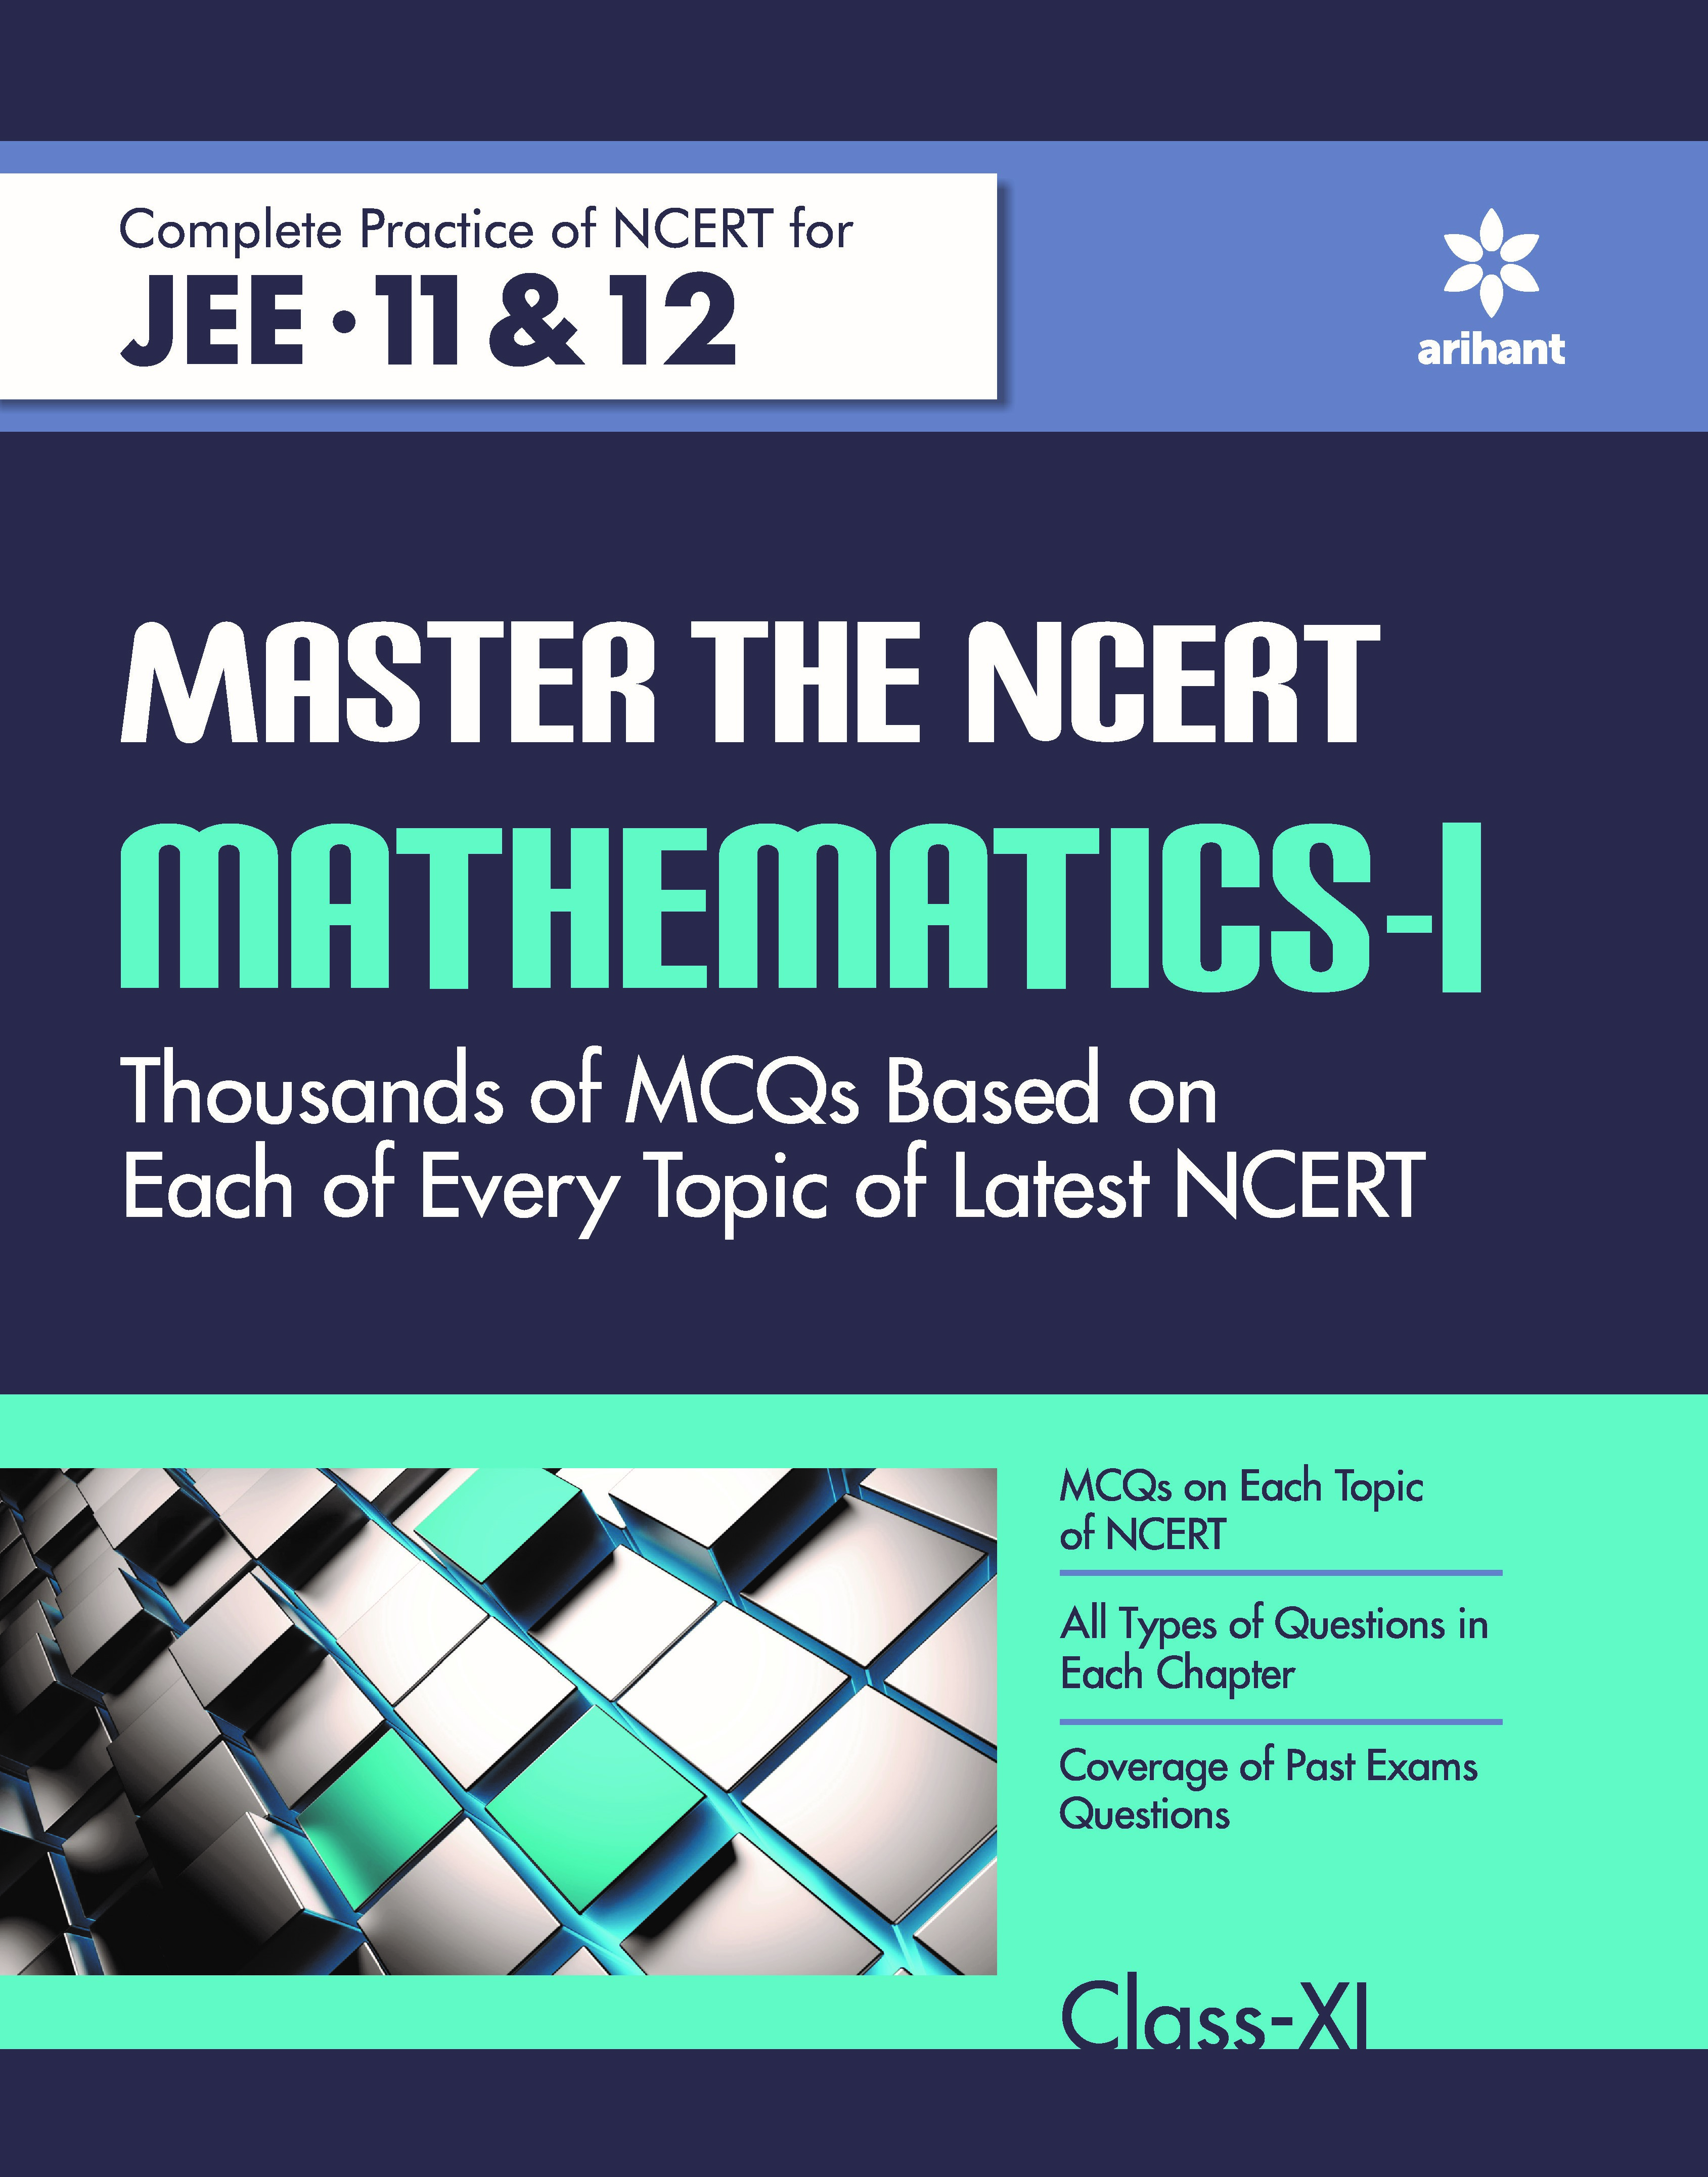 Master The NCERT for JEE Mathematics - Vol.1 2021